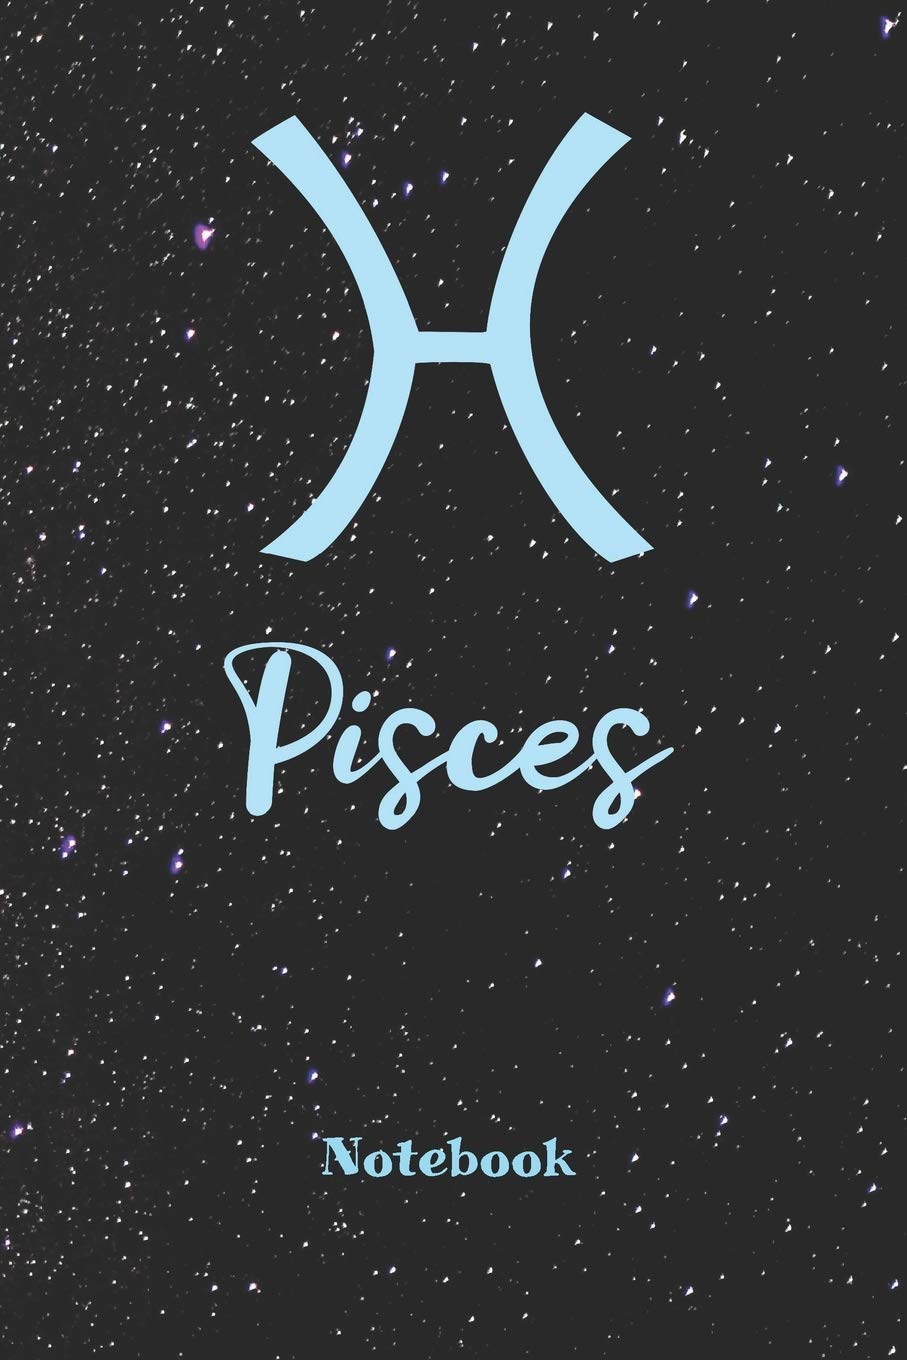 Pisces Notebook: 120 pages, 6x9 inches in size, high quality paper, perfect bound for<ref> a quality notebook</ref><box>(4,3),(996,996)</box> - Pisces